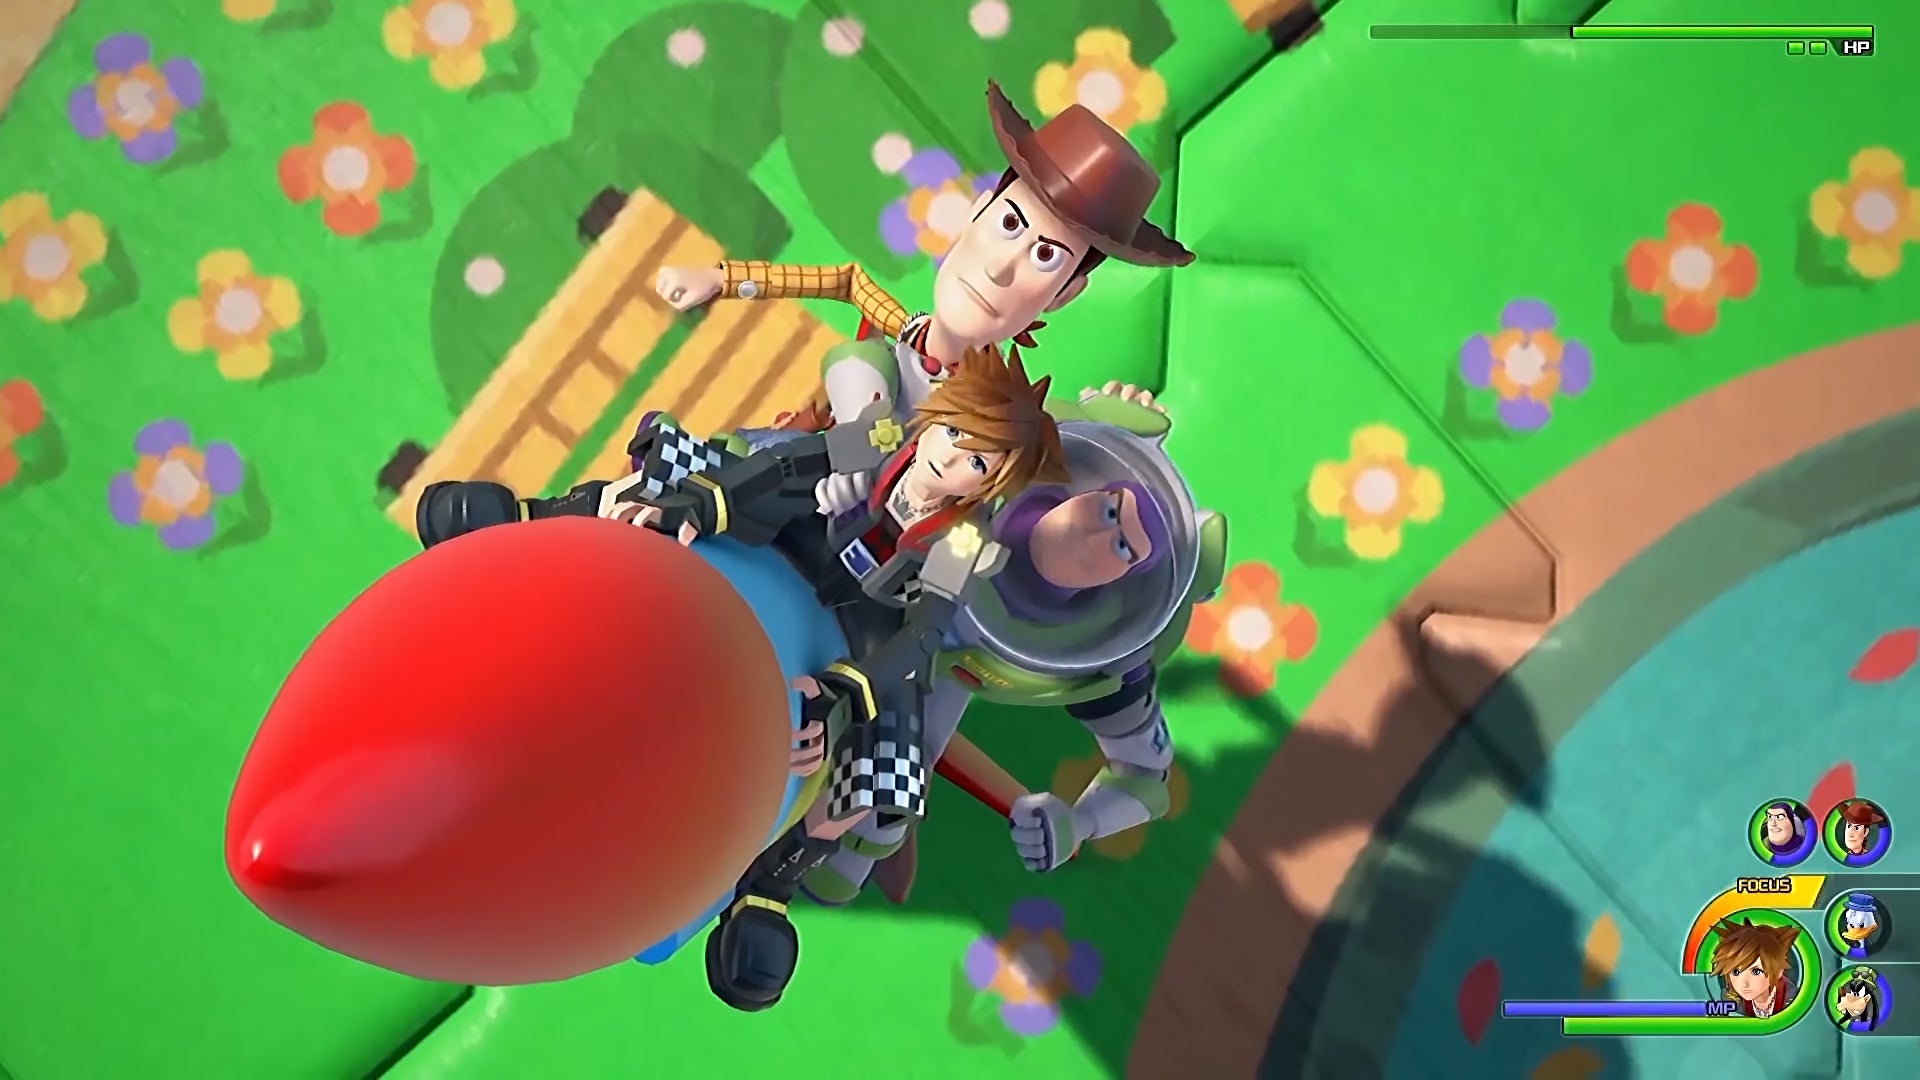 A screenshot from Kingdom Hearts 3 that shows Sora, and Toy Story's Woody and Buzz Lightyear, riding a rocket